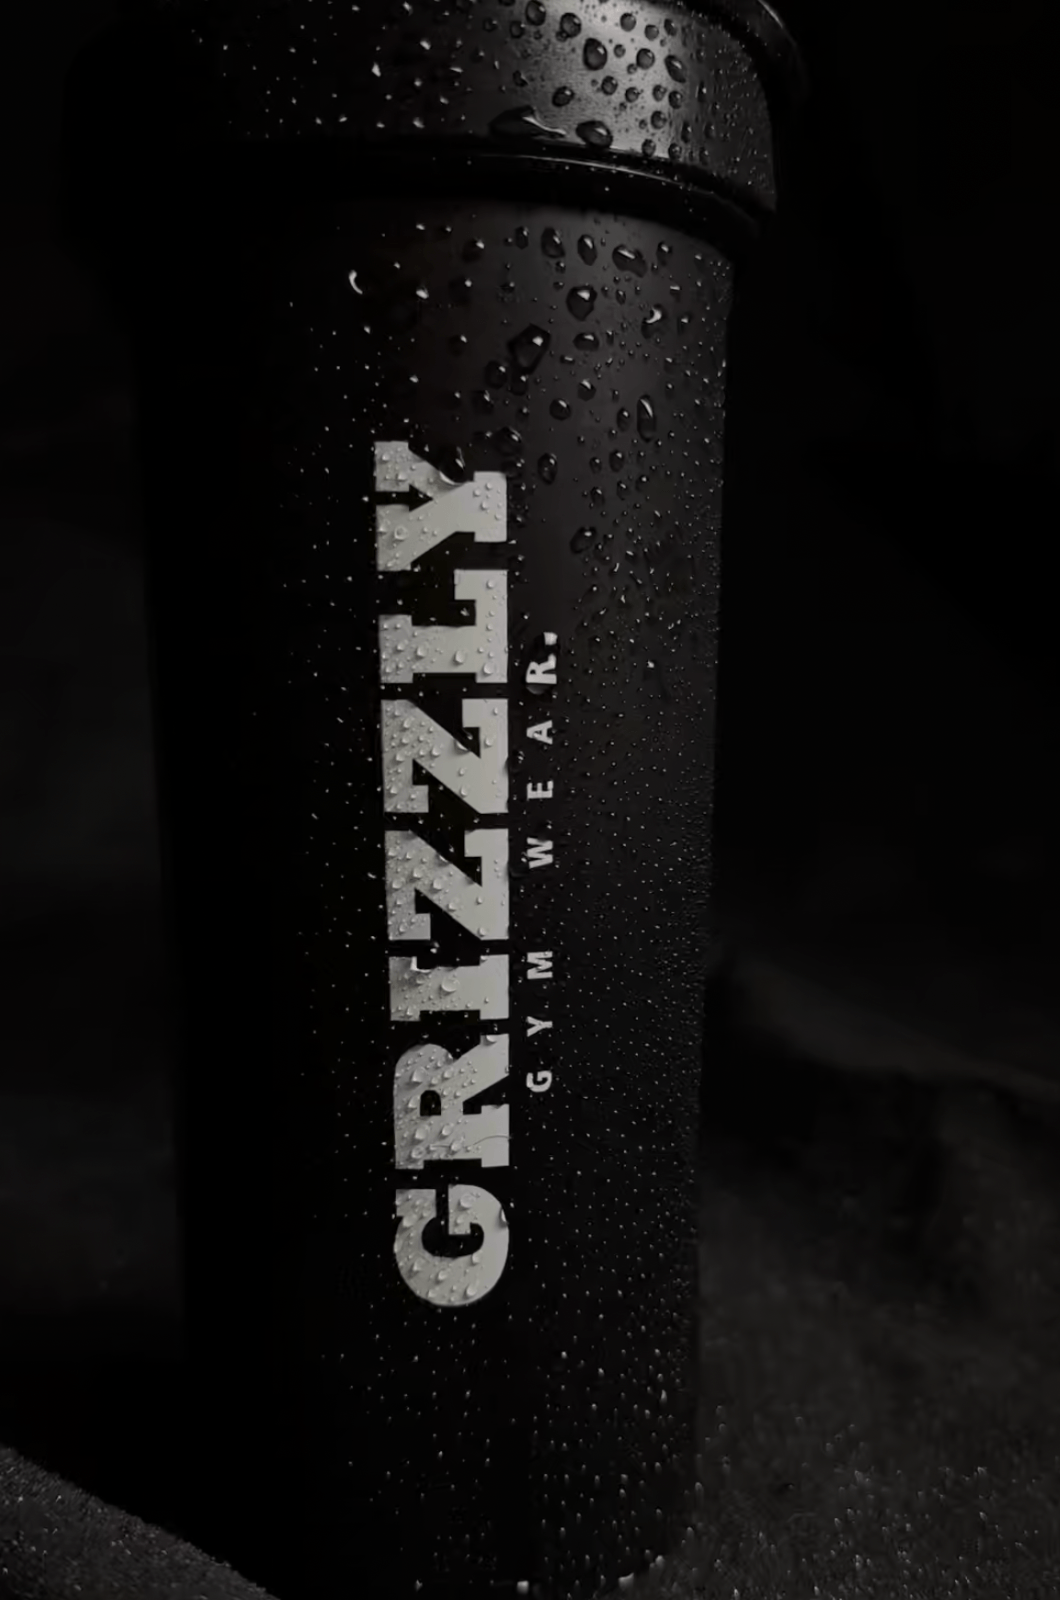 Grizzly Shaker 600 ml